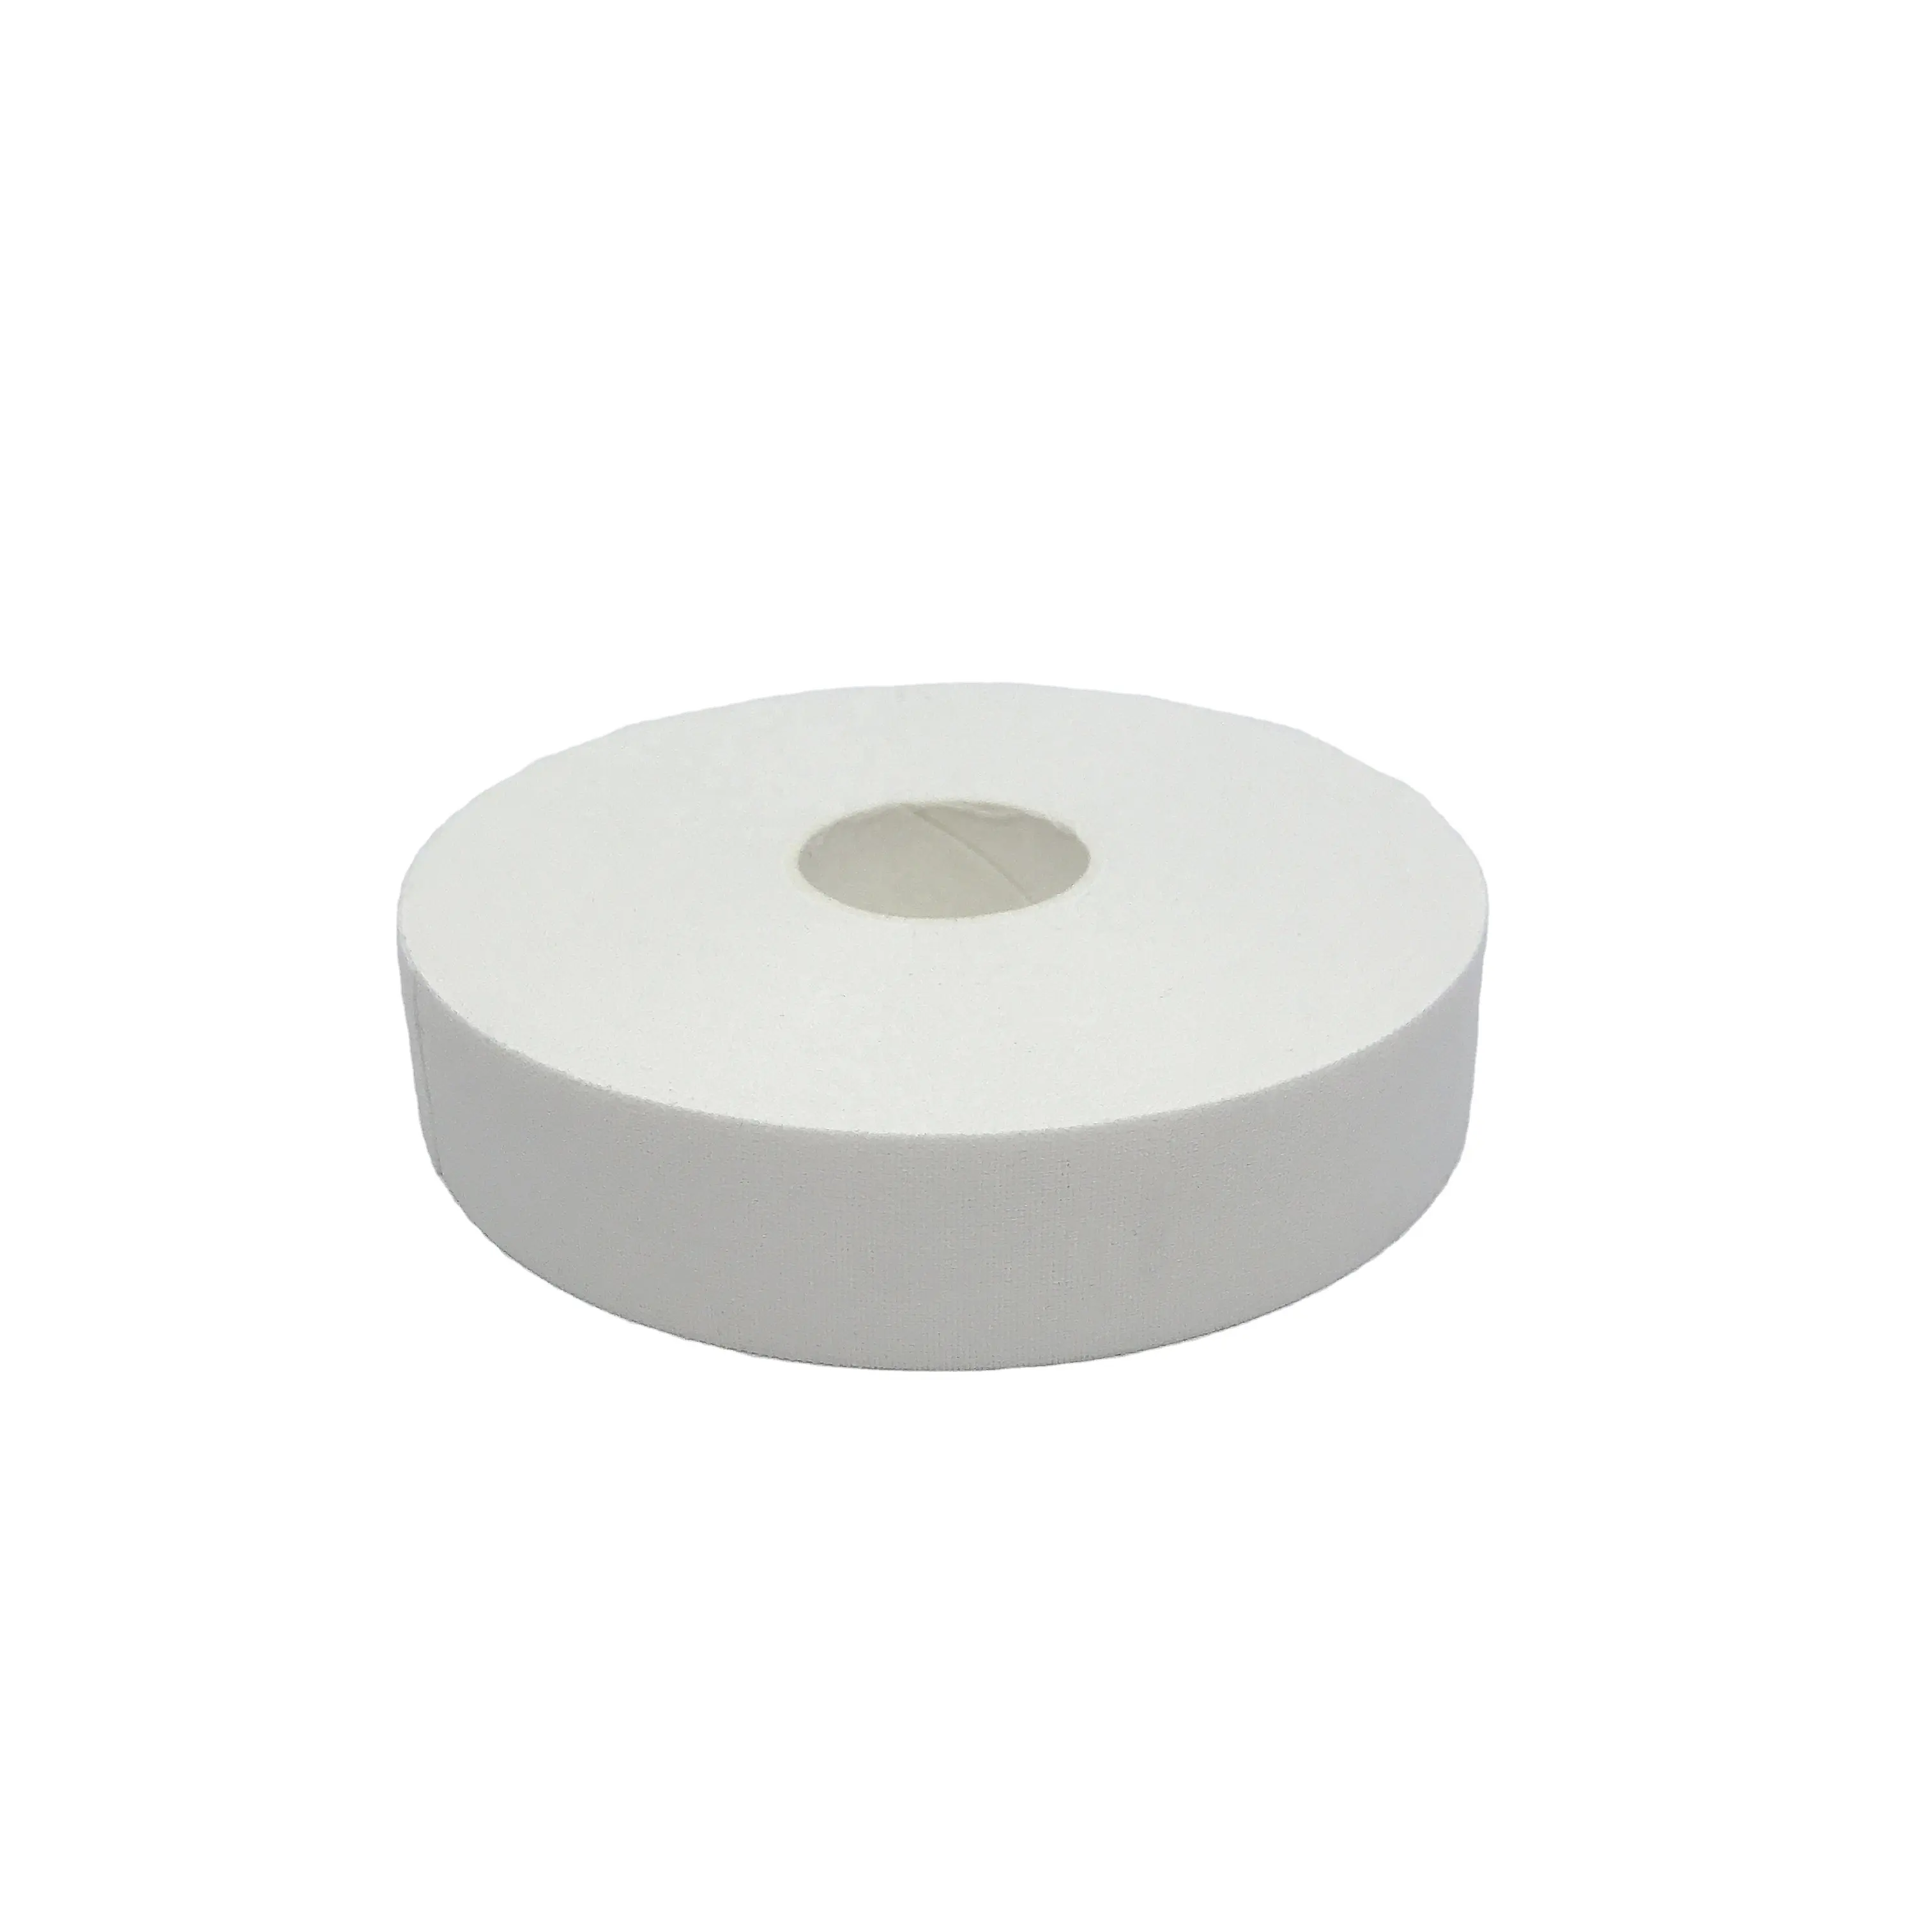 CE approved high quality sports safety ice hockey tape easy tear by hand